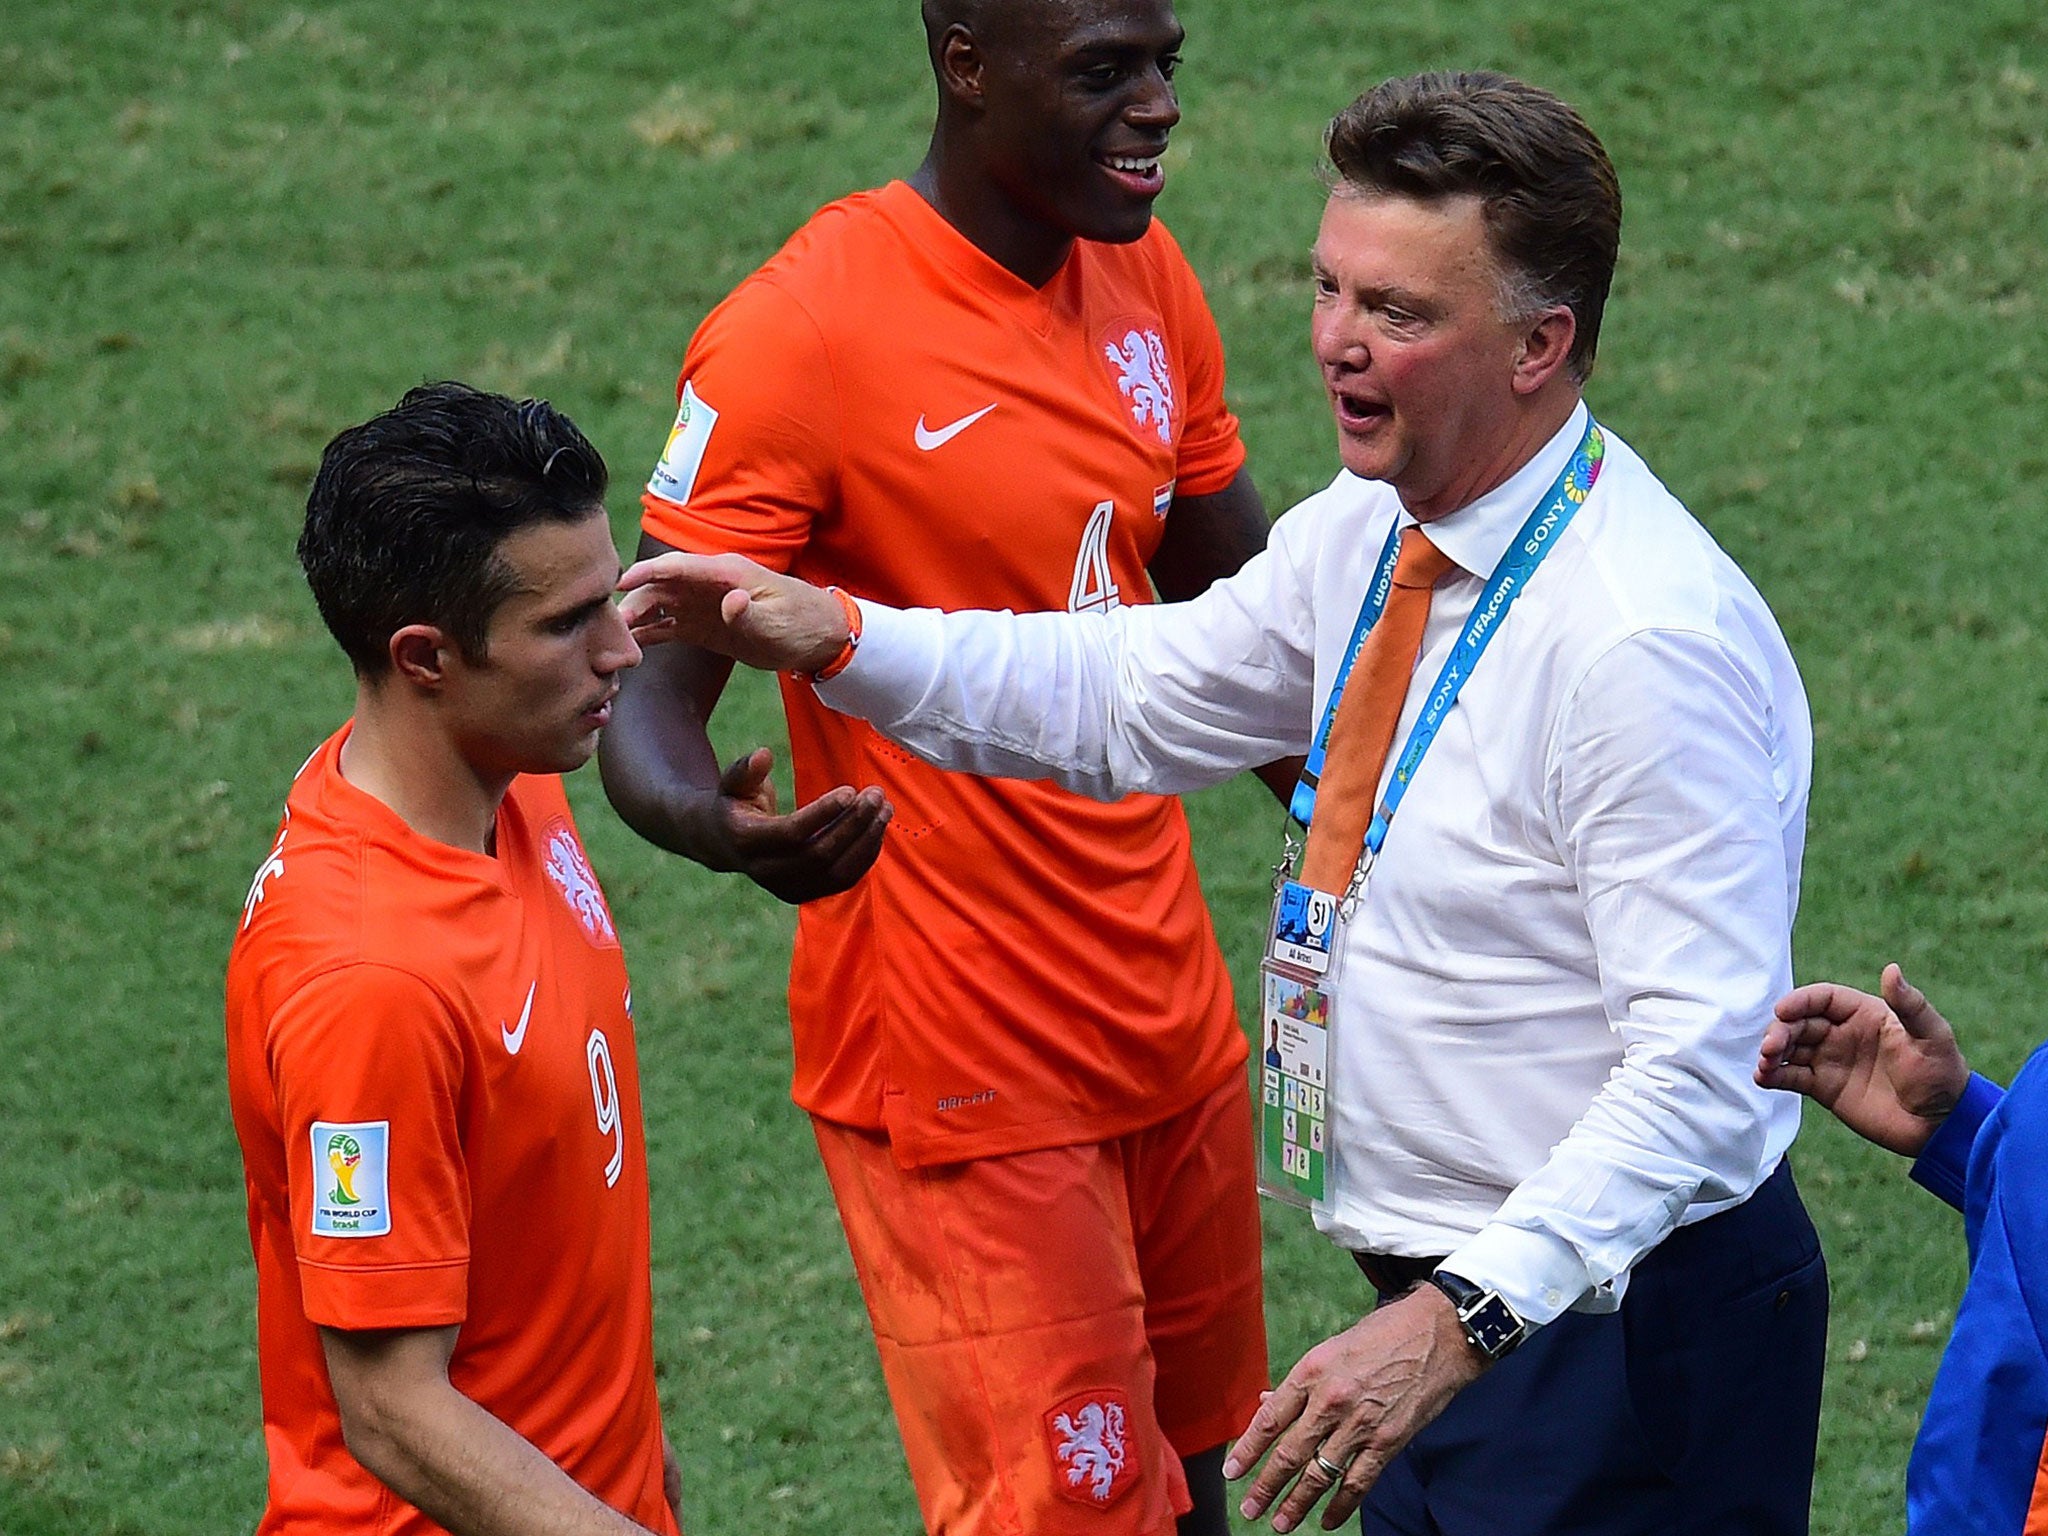 Louis van Gaal will weat his lucky bracelet (on his right wrist) all the way to the World Cup final